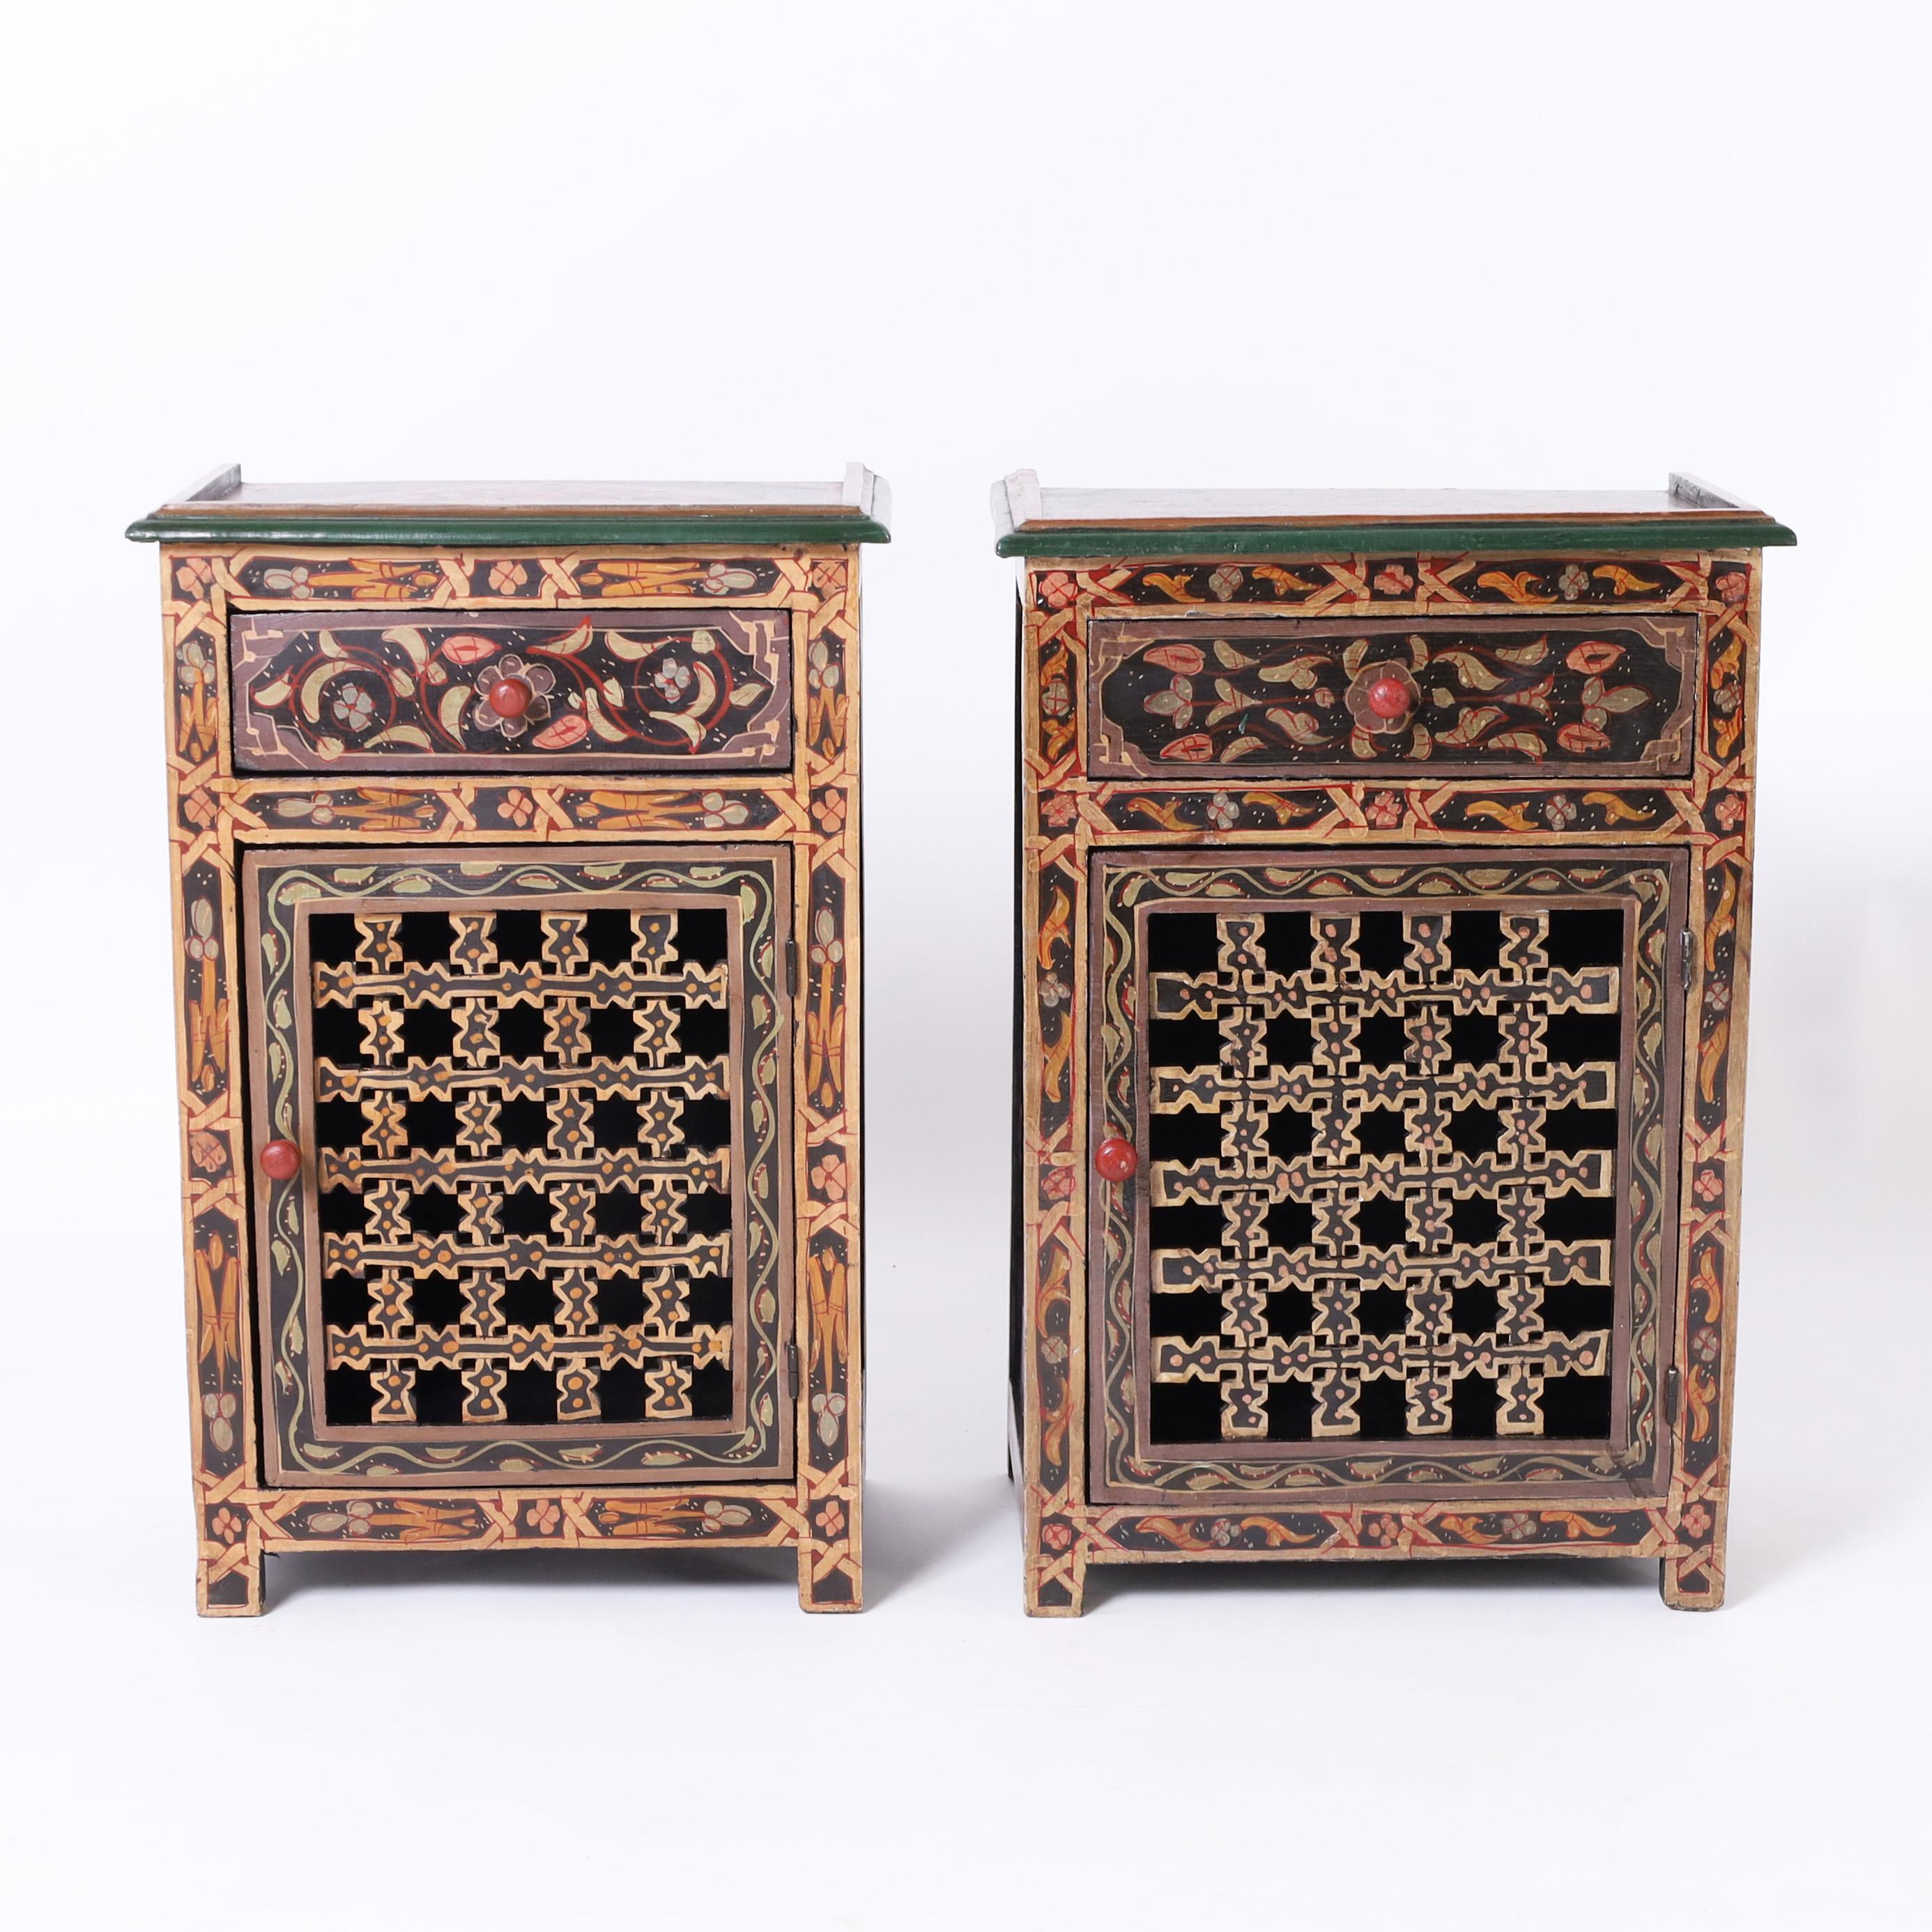 Enchanting pair of vintage Moroccan stands crafted in indigenous hardwoods with one drawer over a cabinet door with open fretwork and paint decorated in floral designs with distinctive mediterranean colors.